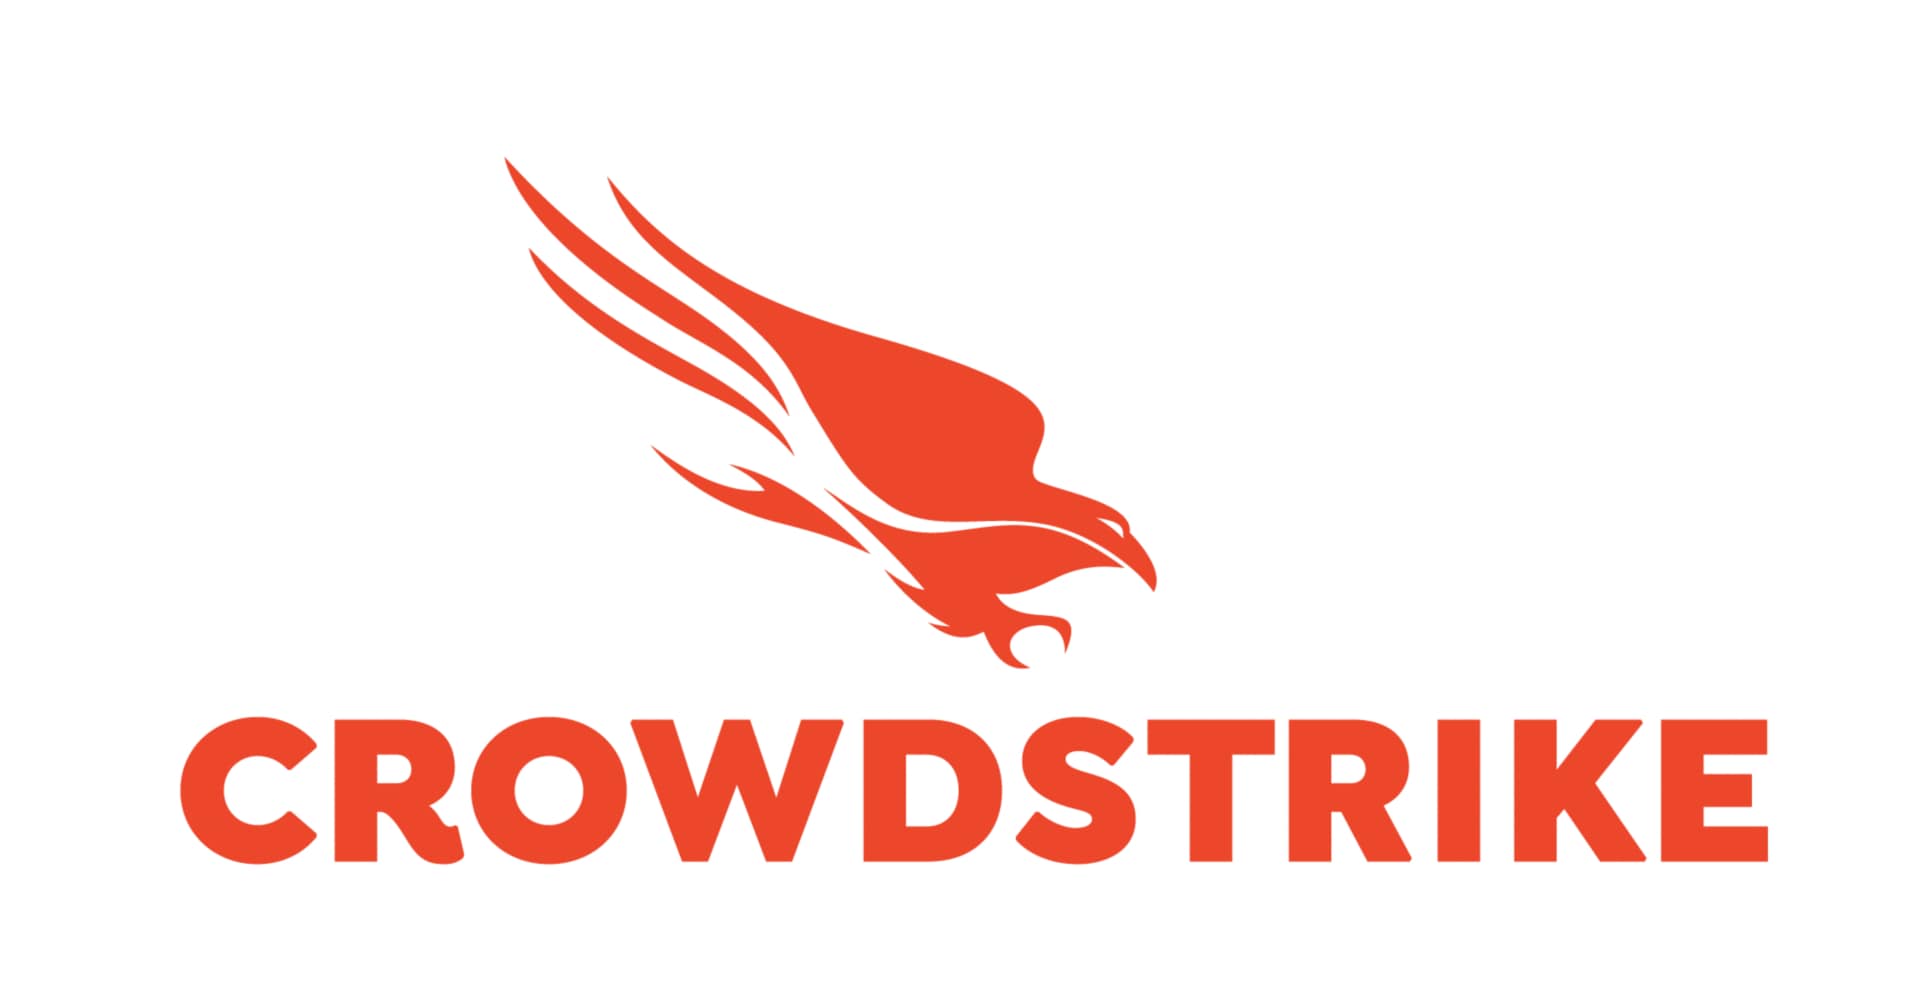 CrowdStrike 3-Month Falcon Overwatch Service (150-299 Licenses)